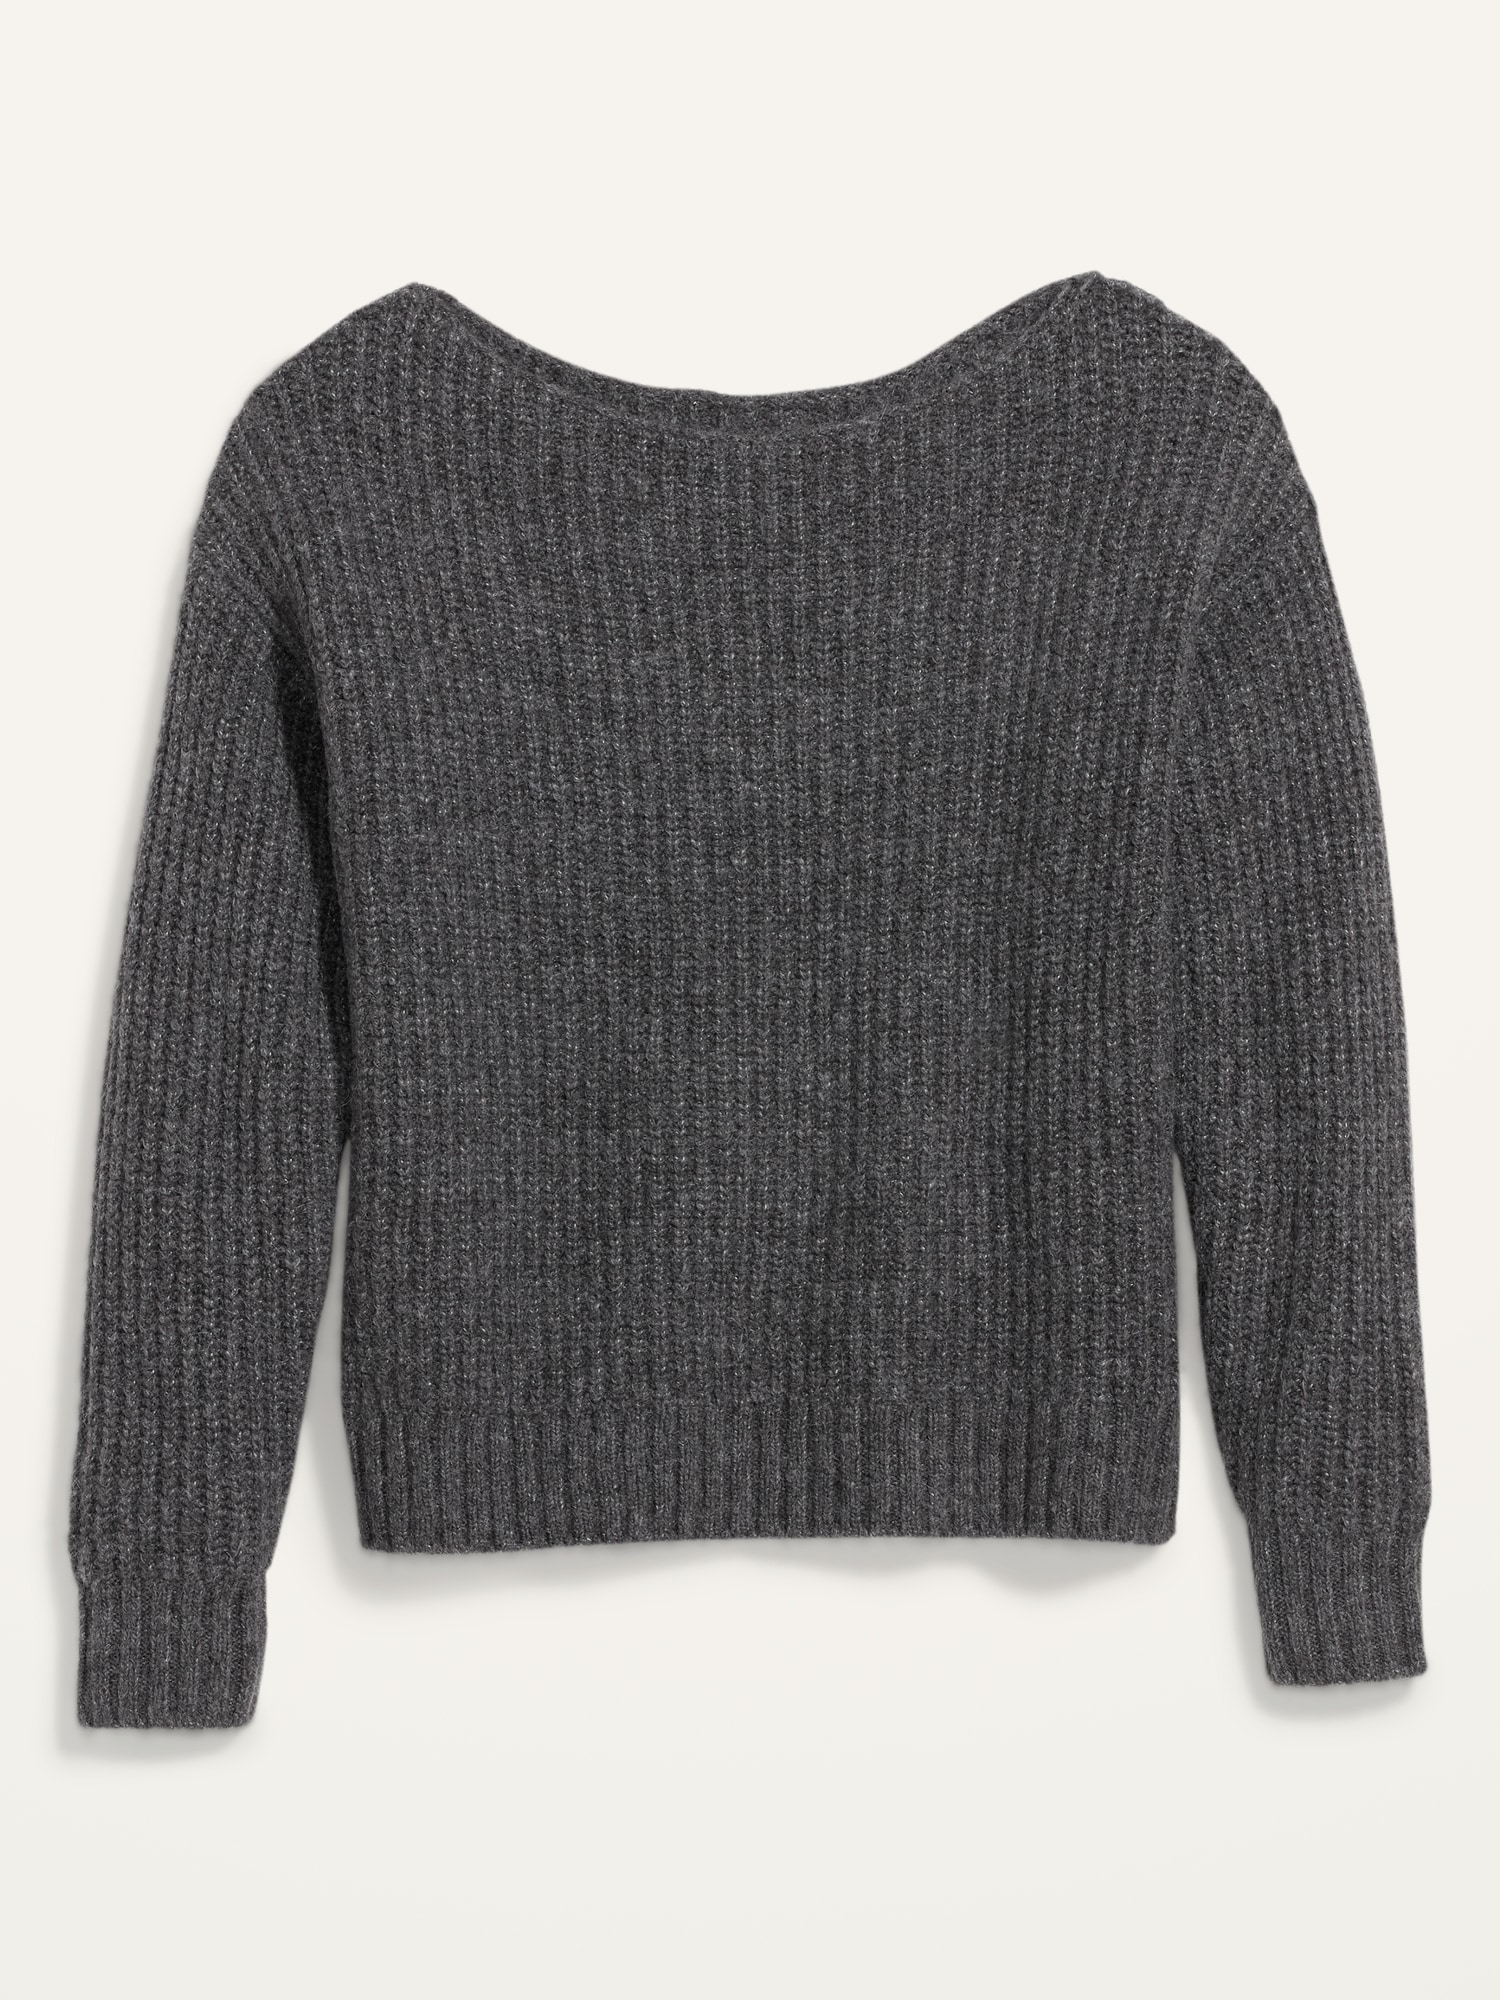 Slouchy Cozy Boat-Neck Sweater for Women | Old Navy